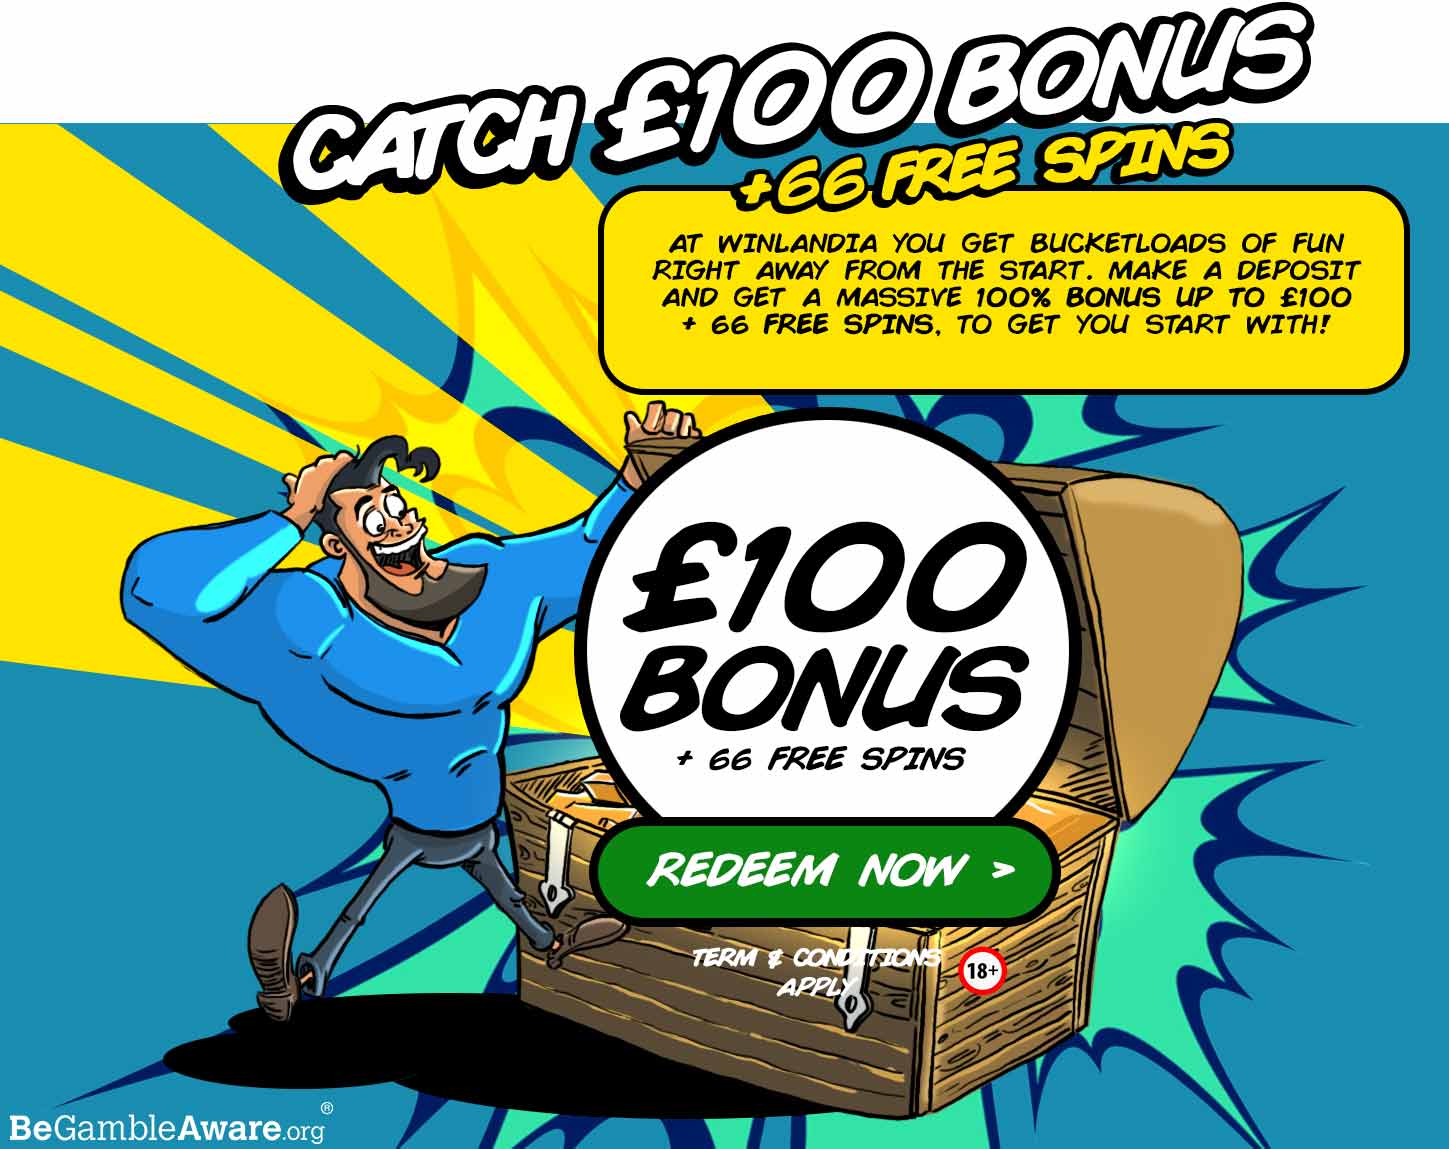 Catch £100 Bonus + 66 Free Spins. At Winlandia yo uget bucketloads of fun right away from the start. Make a deposit and get a massive 100% bonus up to £100 + 66 Free Spins, to get you start with!